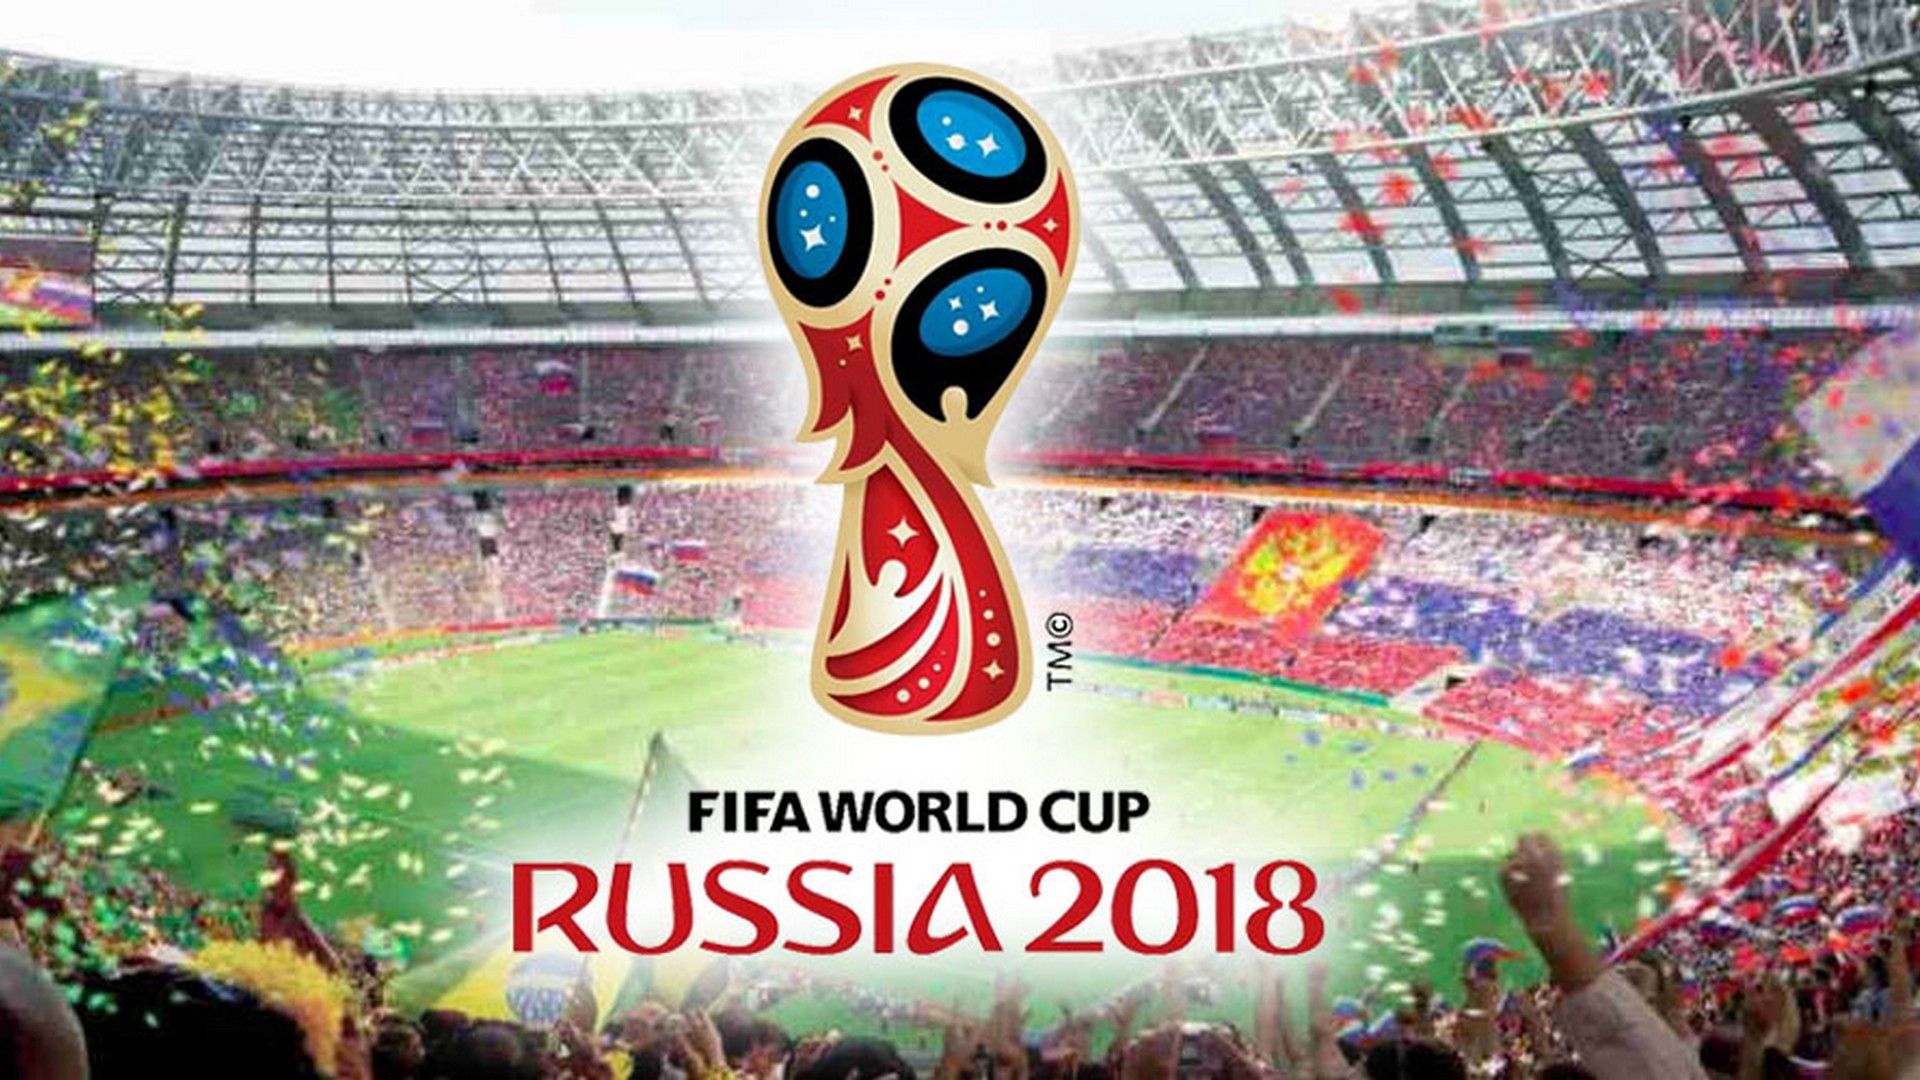 World Cup Russia Wallpaper HD With Resolution 1920X1080